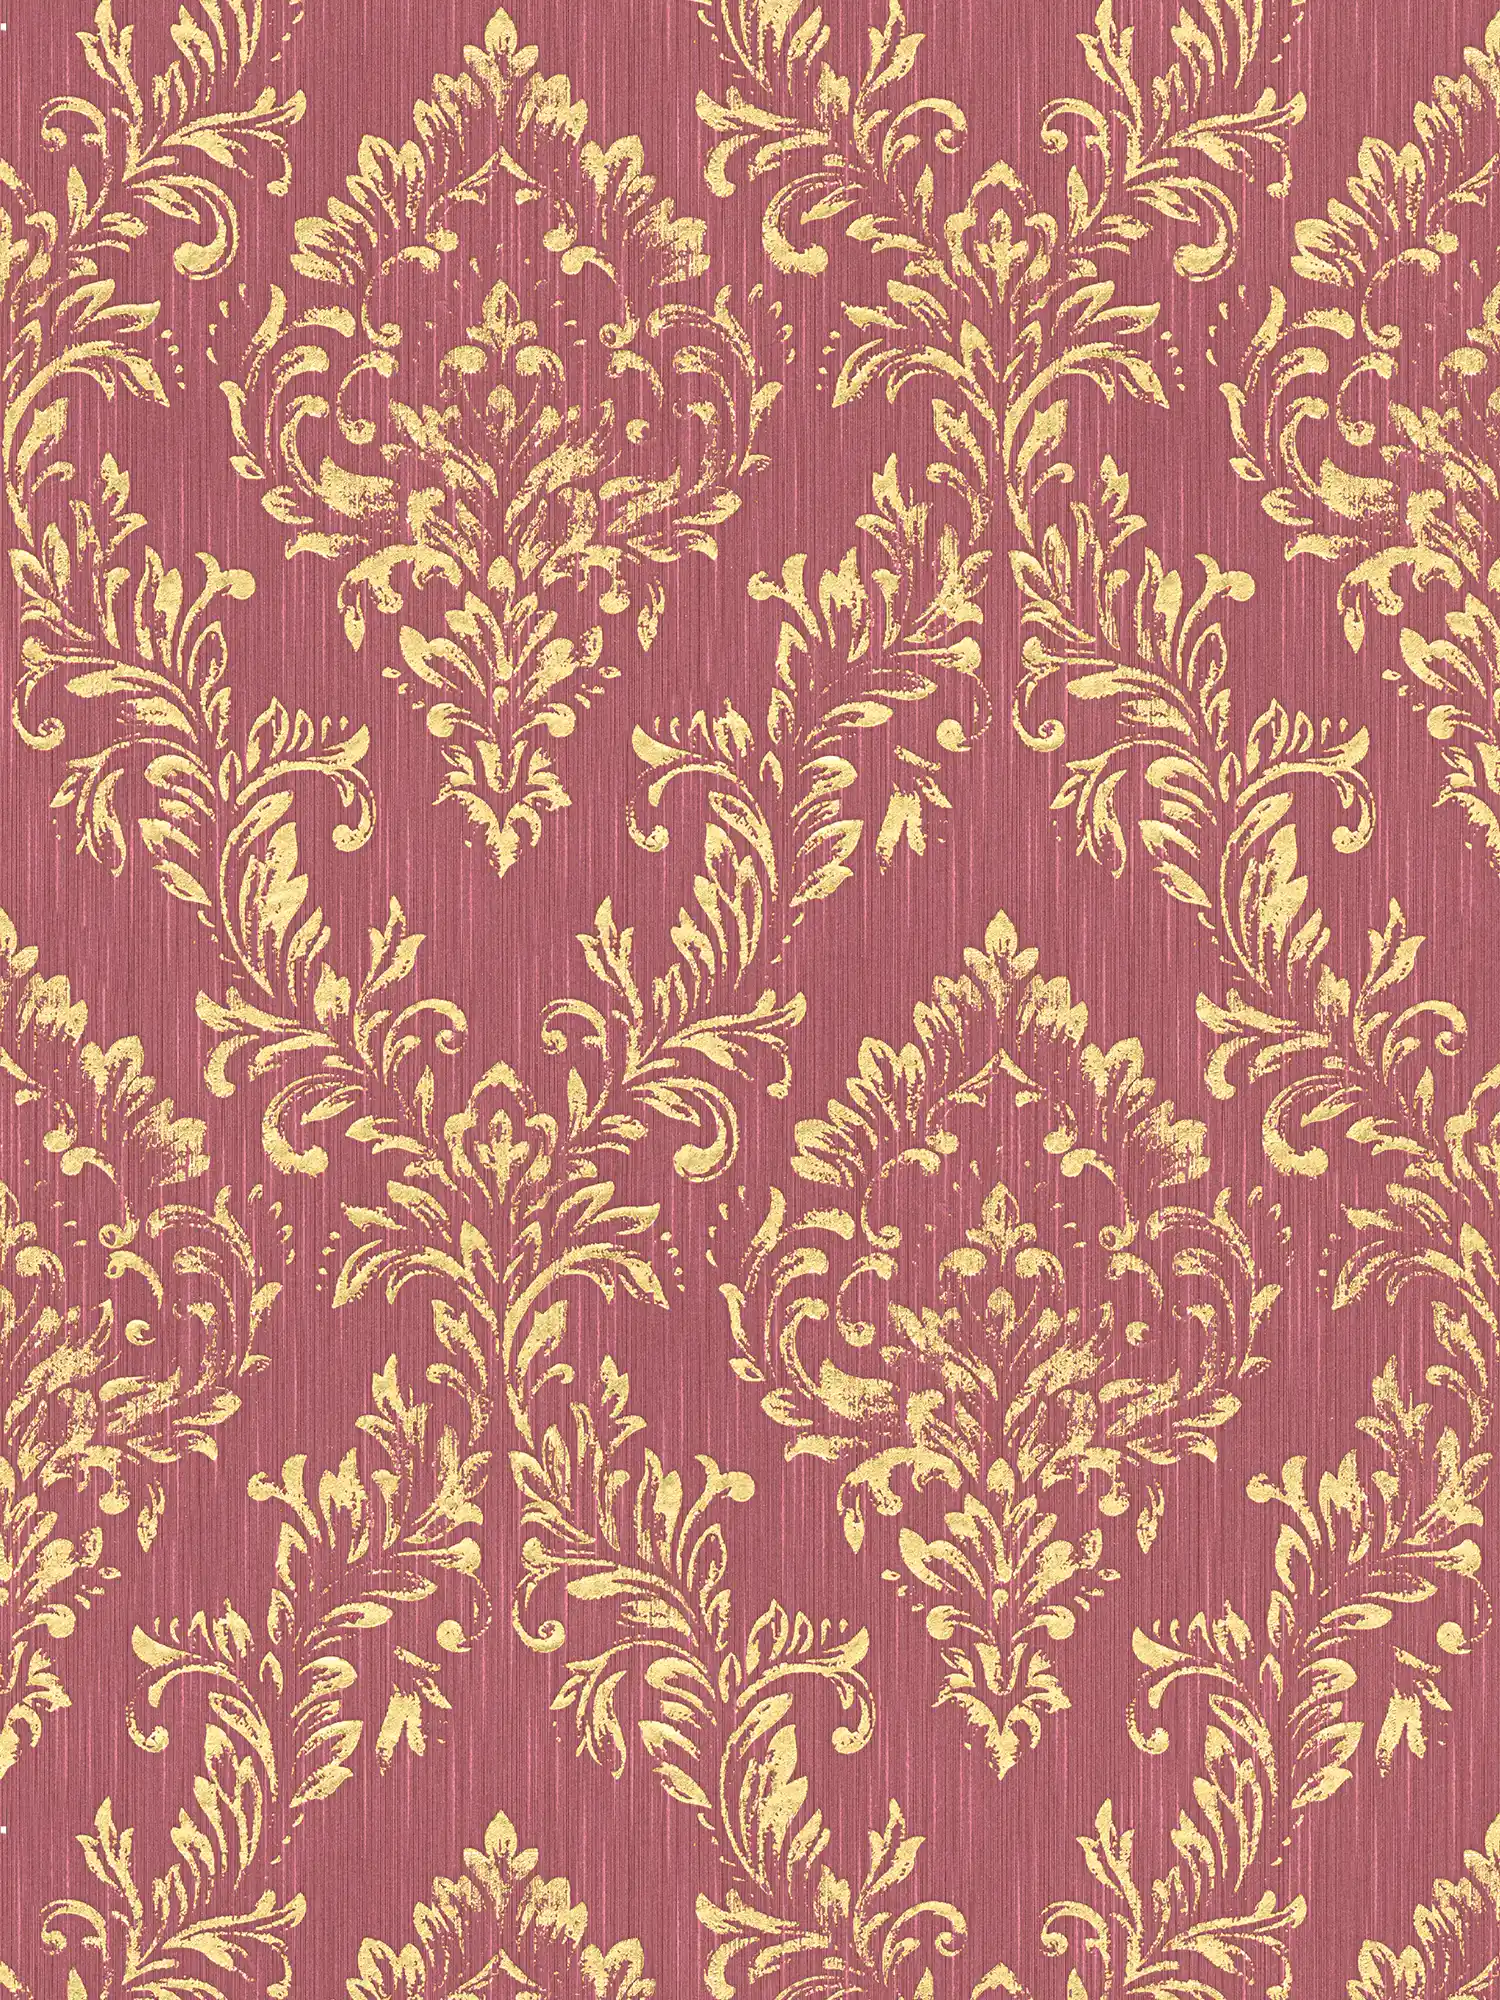 Ornament wallpaper floral with gold glitter effect - gold, red
